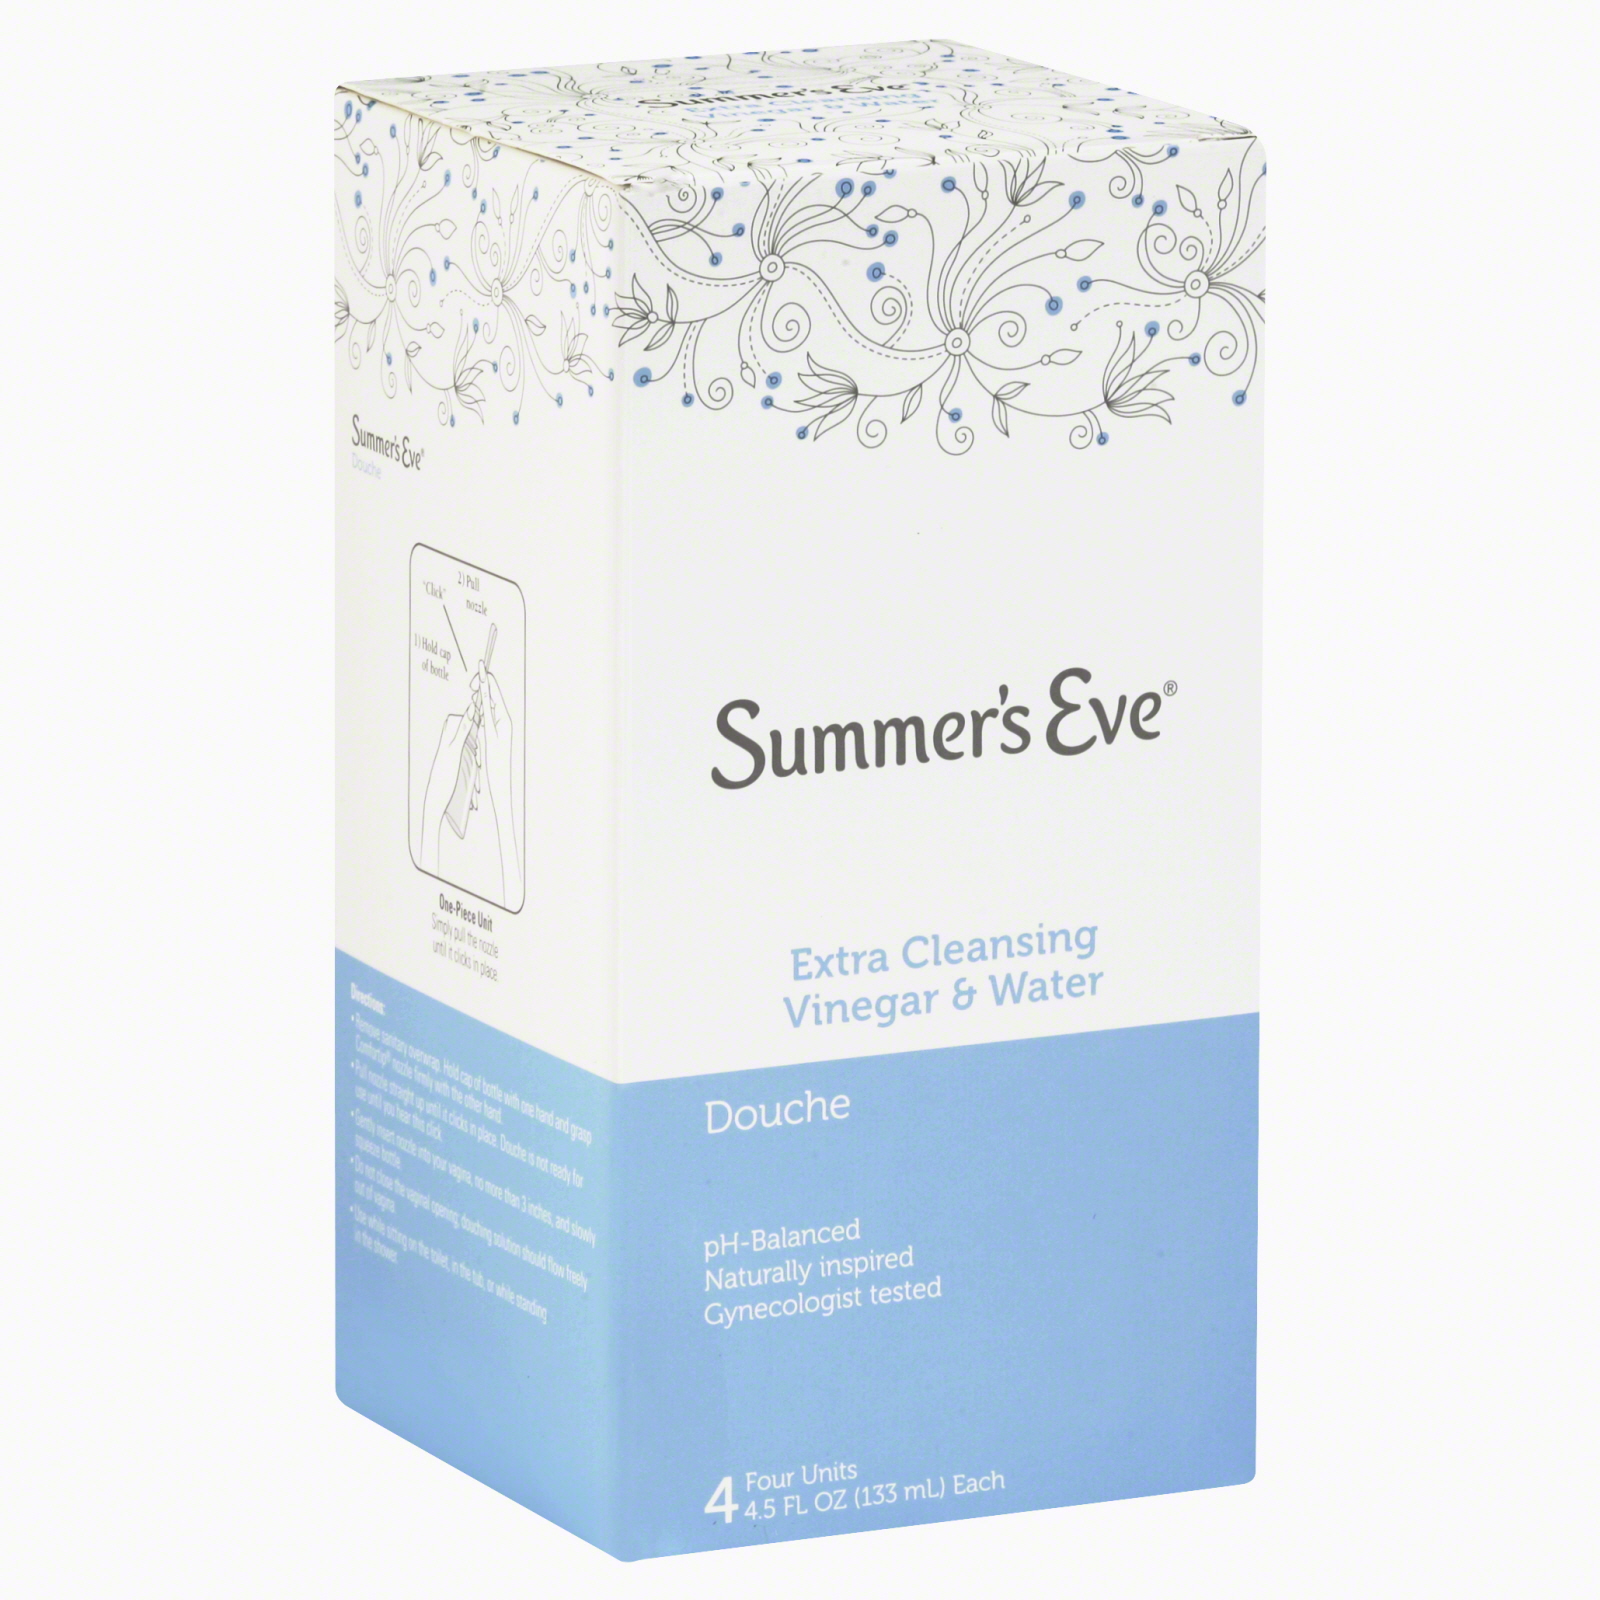 Summer's Eve Douche, Extra Cleansing Vinegar & Water, 4 - 4.5 fl oz (133 ml) units